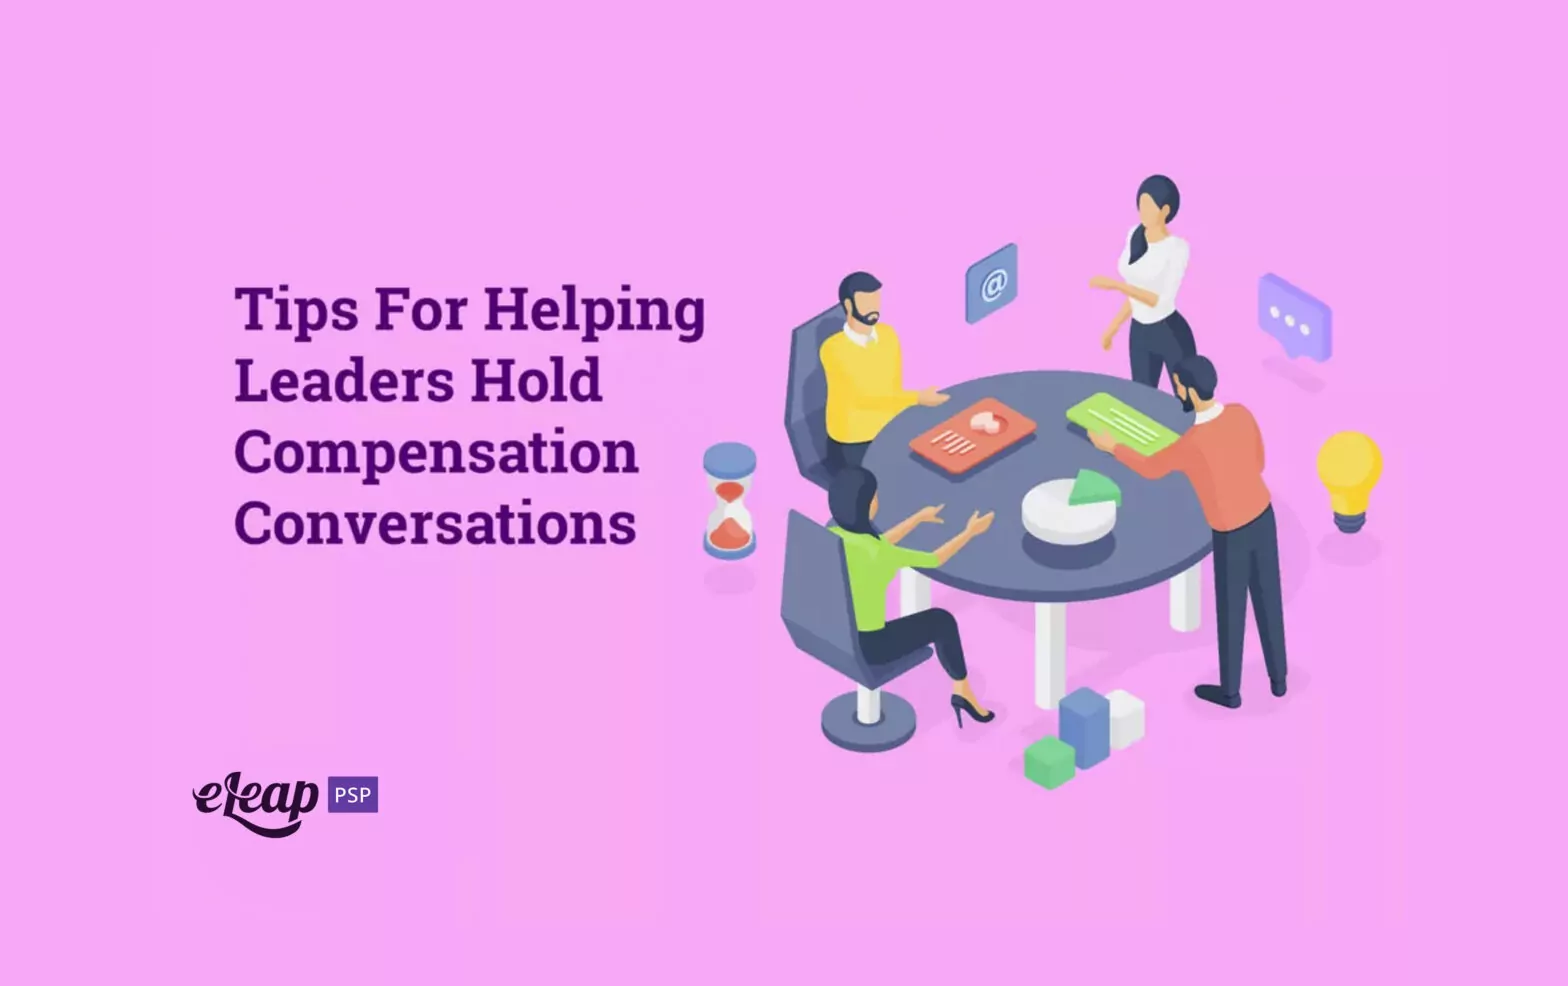 Tips For Helping Leaders Hold Compensation Conversations